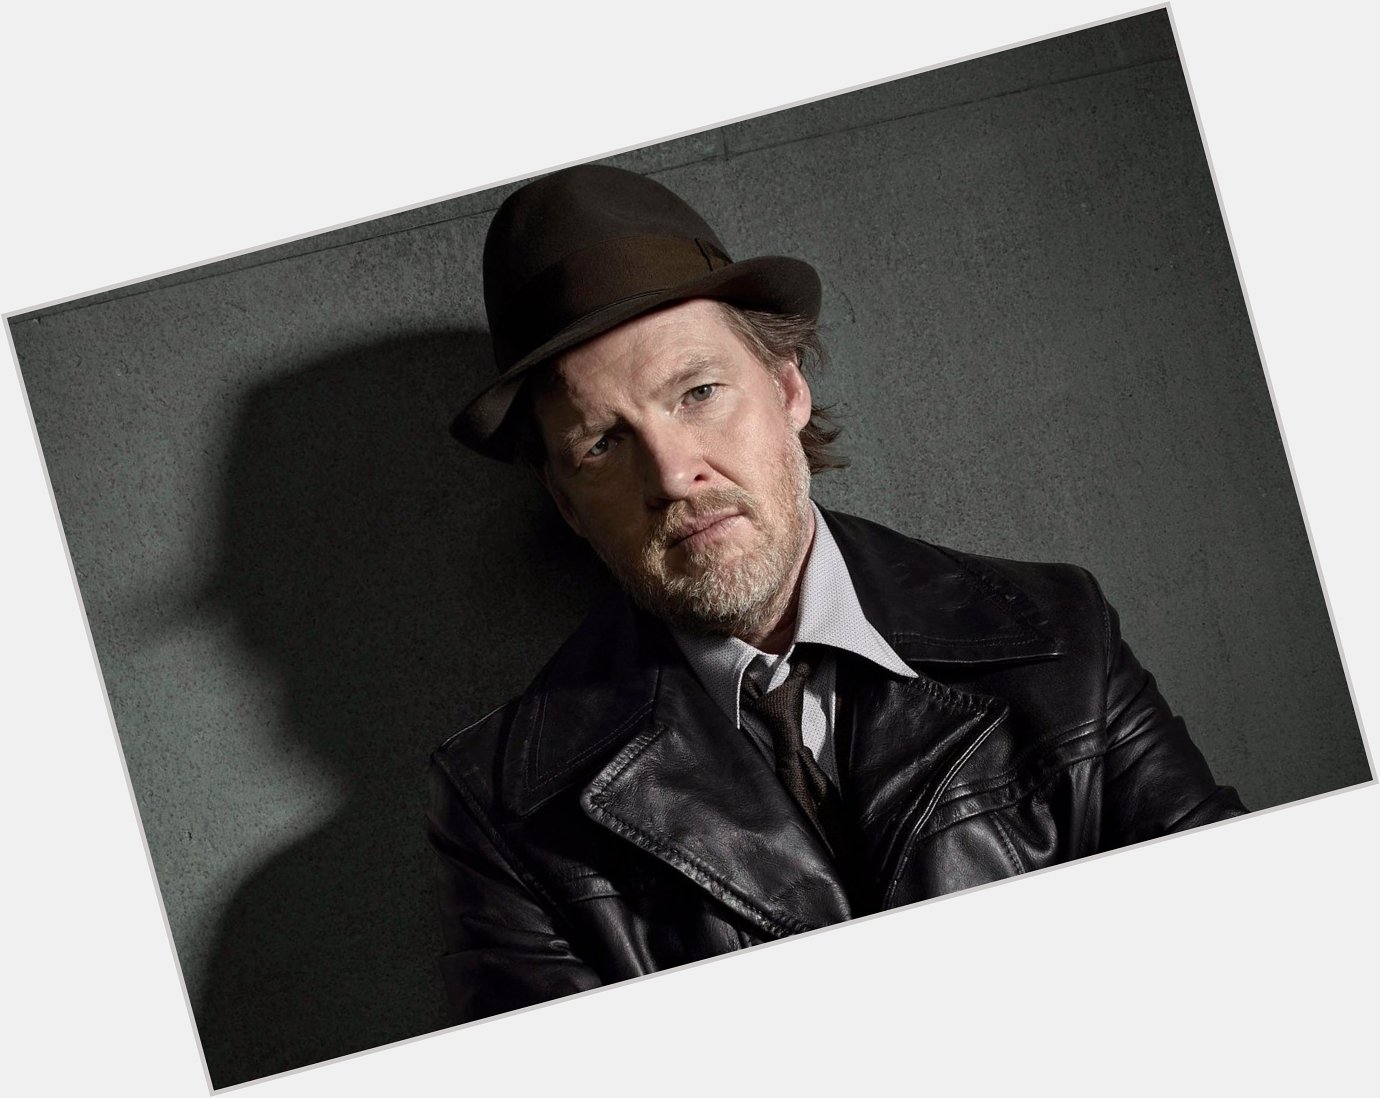 Happy birthday to Donal Logue, who portrayed world-weary police detective Harvey Bullock on the TV series \Gotham.\ 